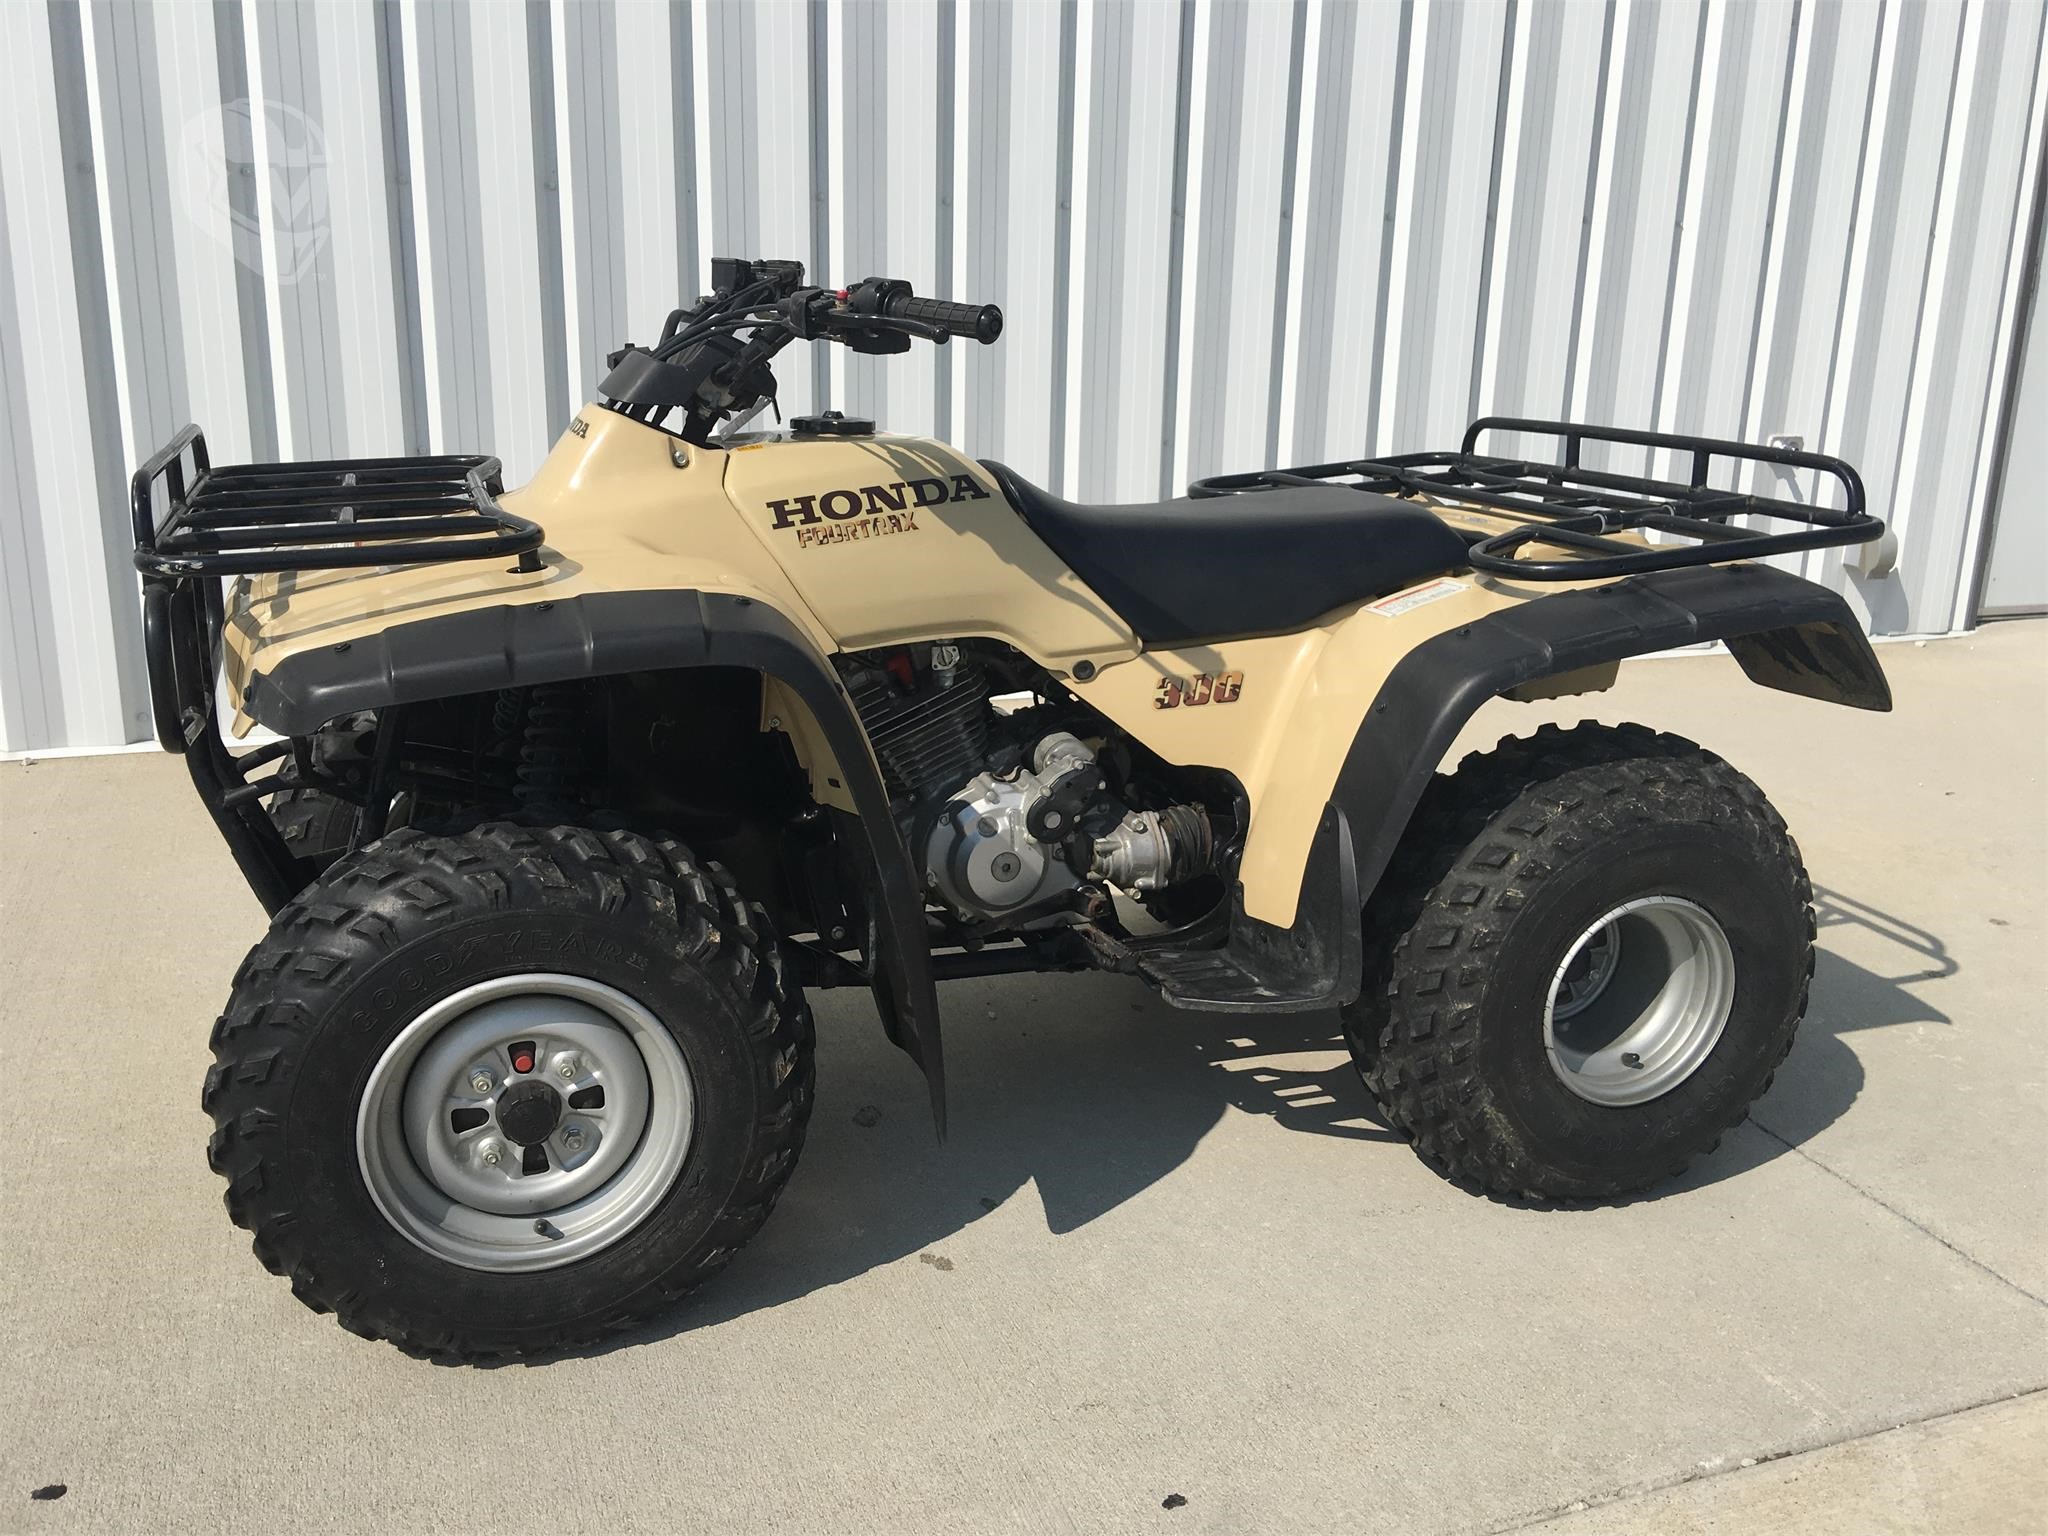 1996 HONDA FOURTRAX 300 Auction Results in Poseyville